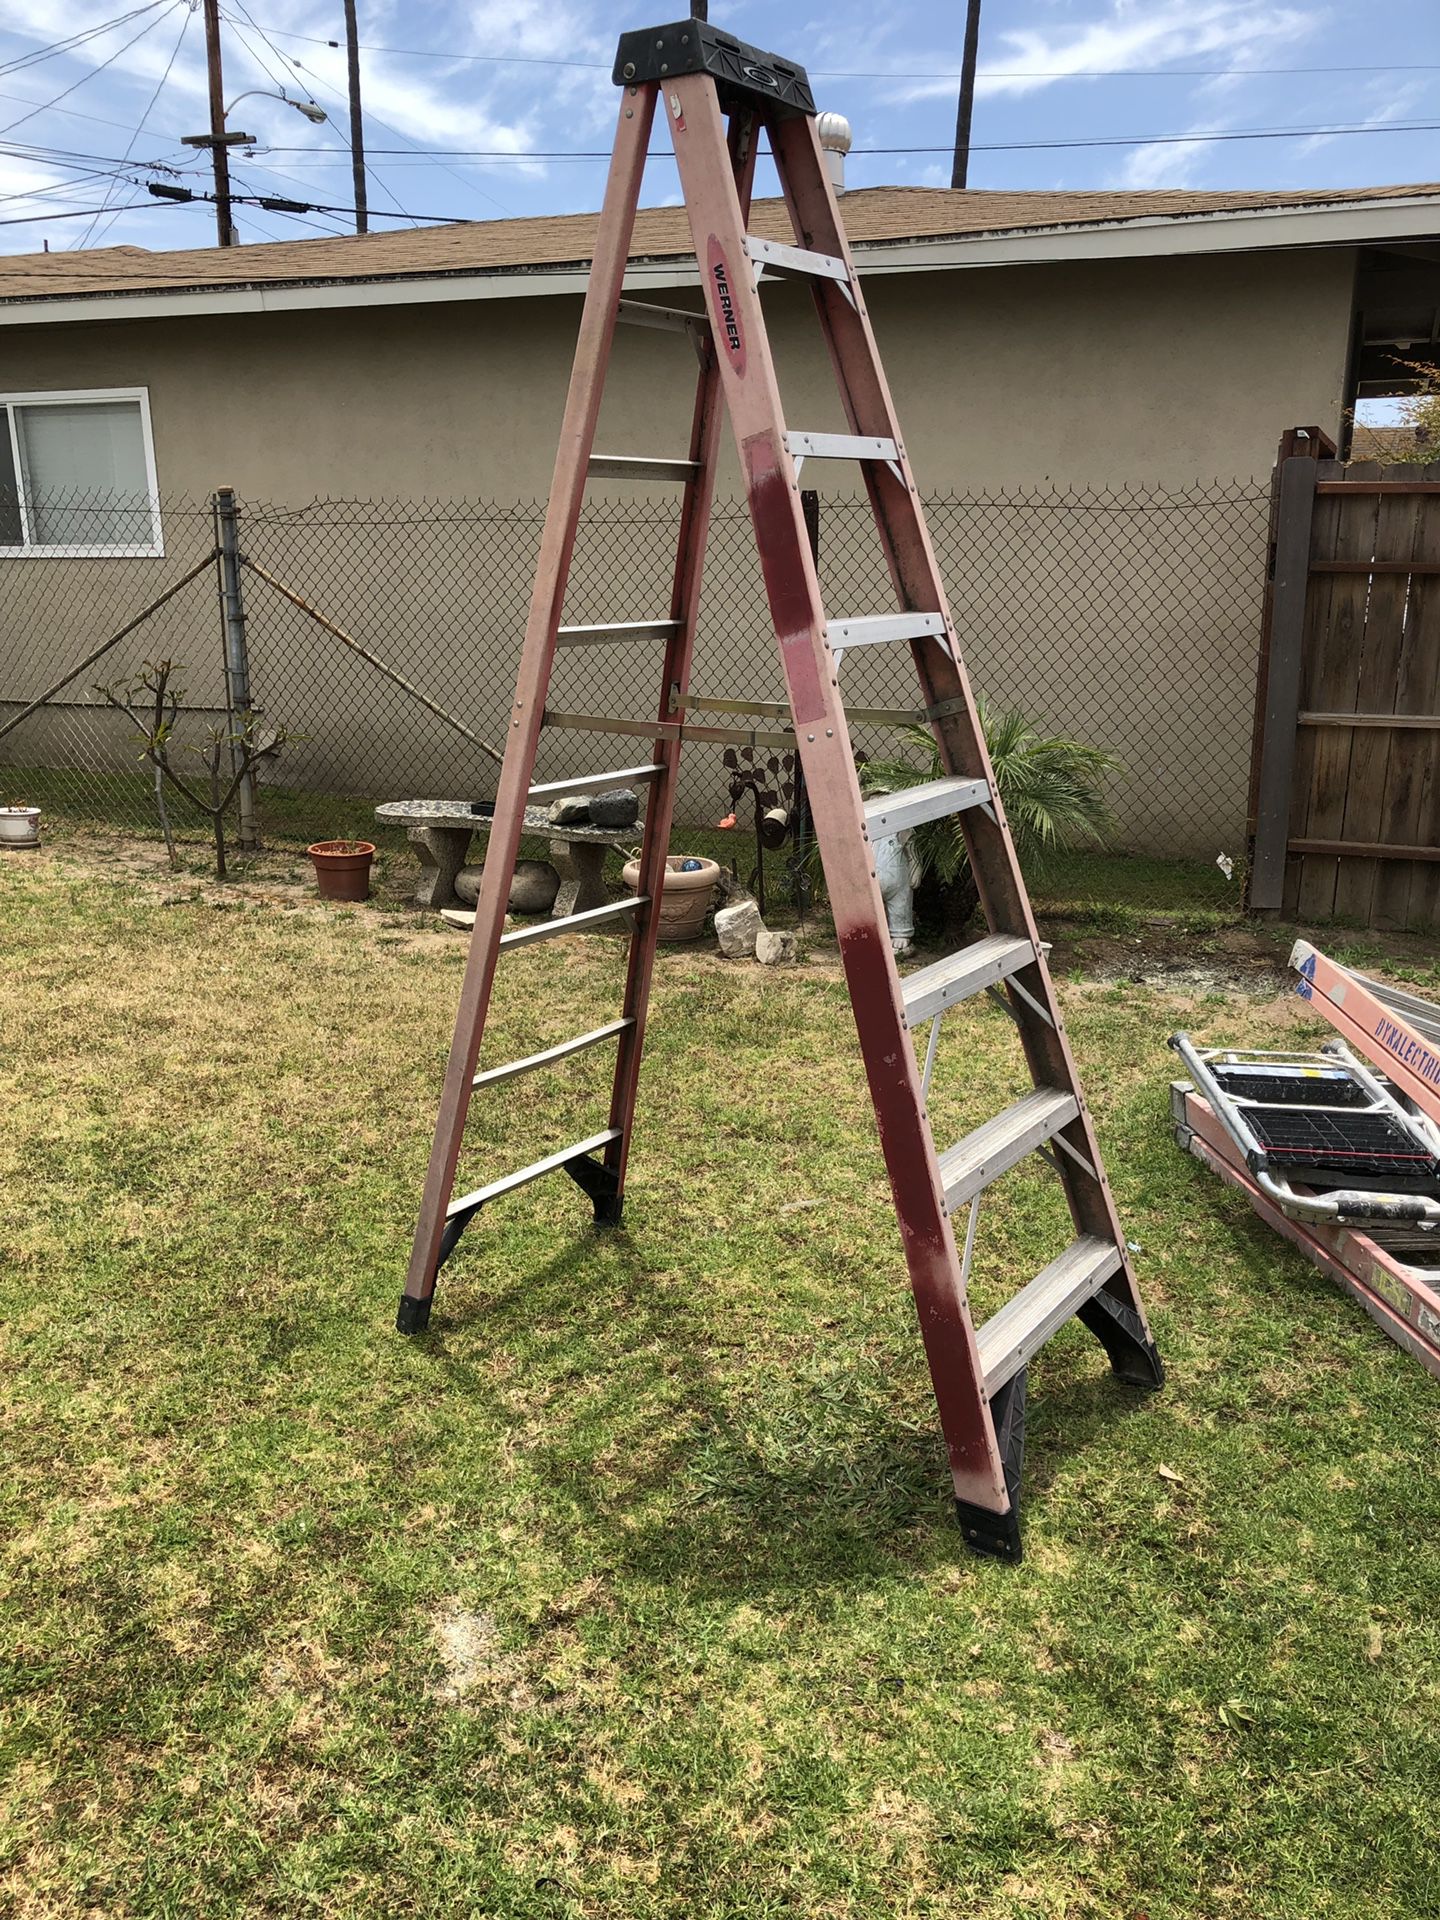 WHAT I HAVE FOR SALE IS A USED 8’ Fiberglass LADDER. Used Fiberglass 8’ ladder In great condition. Asking $65 bucks.